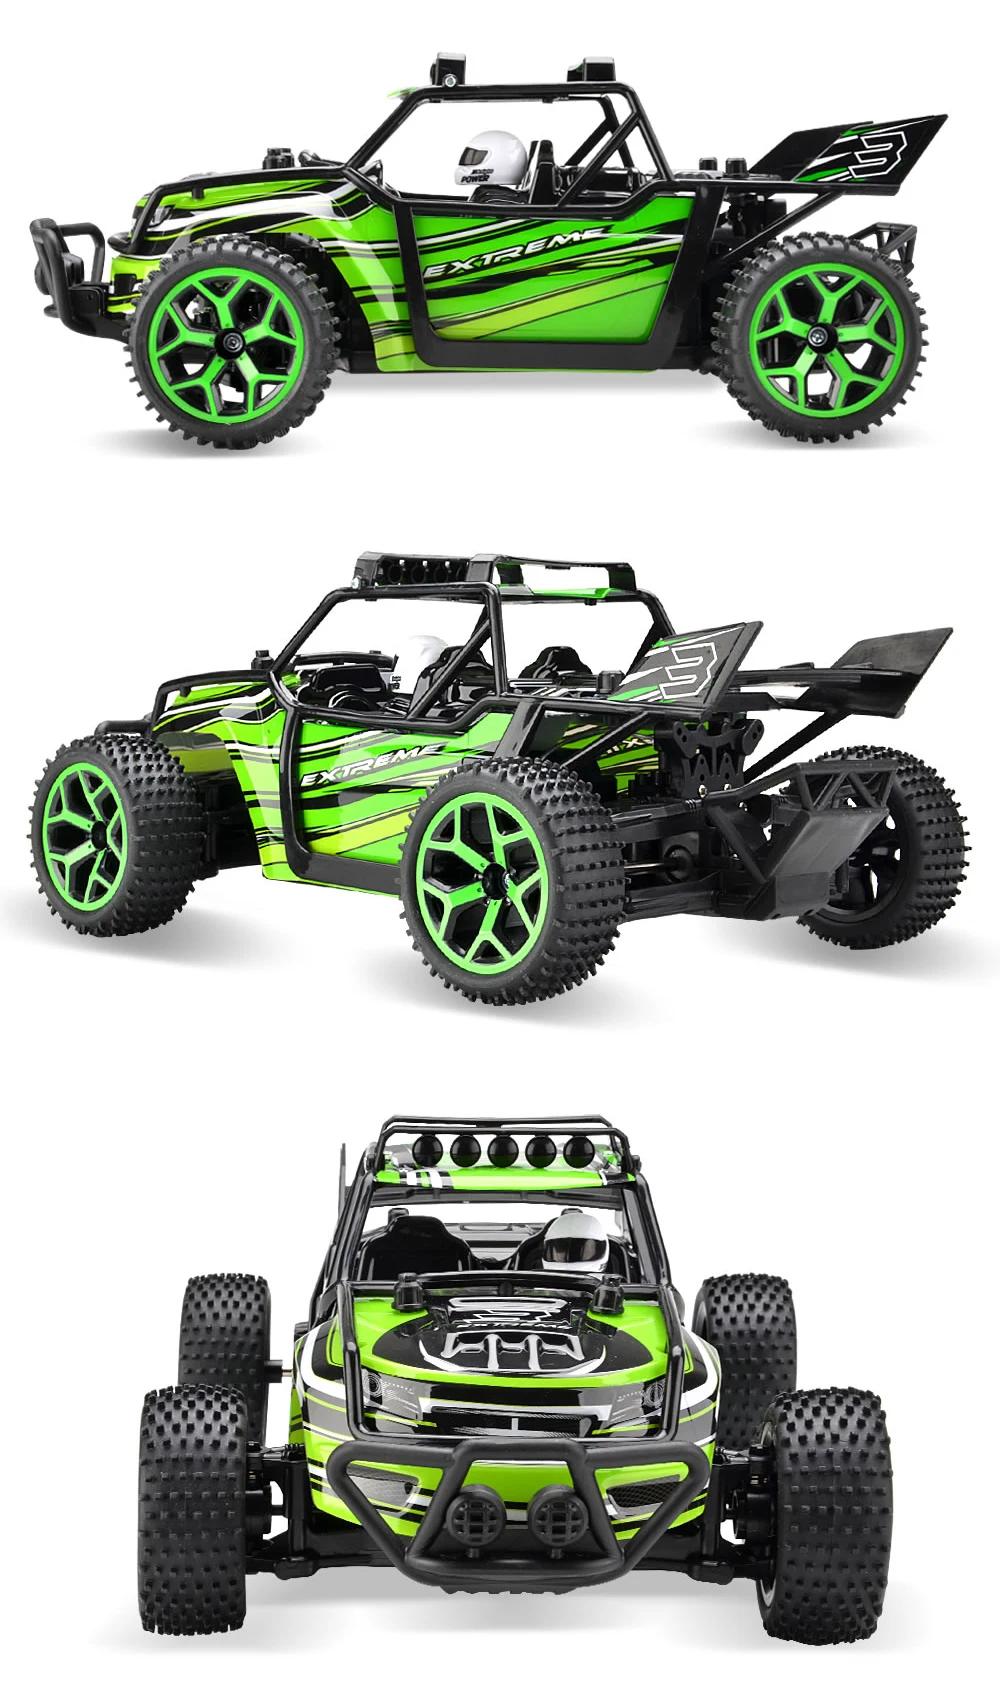 Zc Rc Car 333 Gs04b X Knight Rc 2 4g 1 18 4 Wheel Drive Big Foot Speed Buggy Cars Green Buy Geschwindigkeit Buggy Autos 4wd 1 18 Rc Auto 1 18 Rc Auto 4x4 Off Road Buggy Product